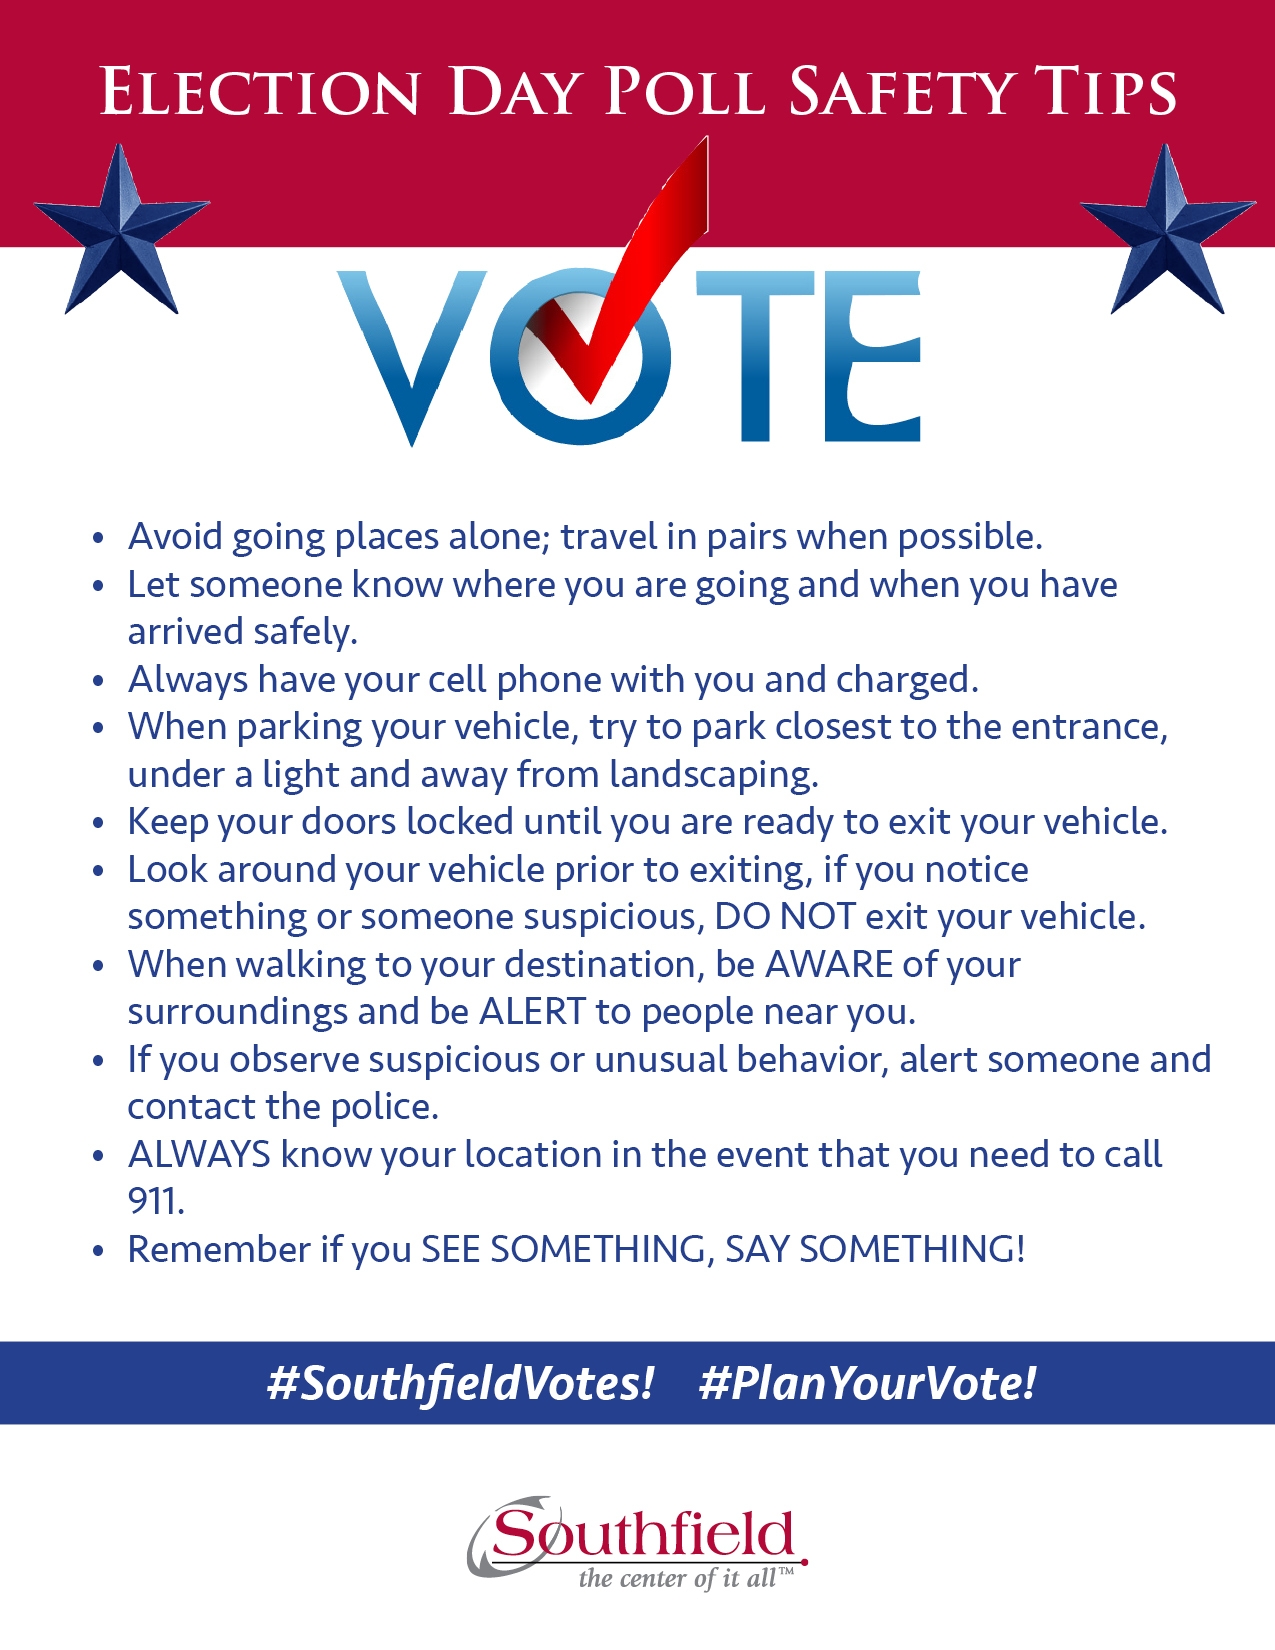 Voting Safety Tips 